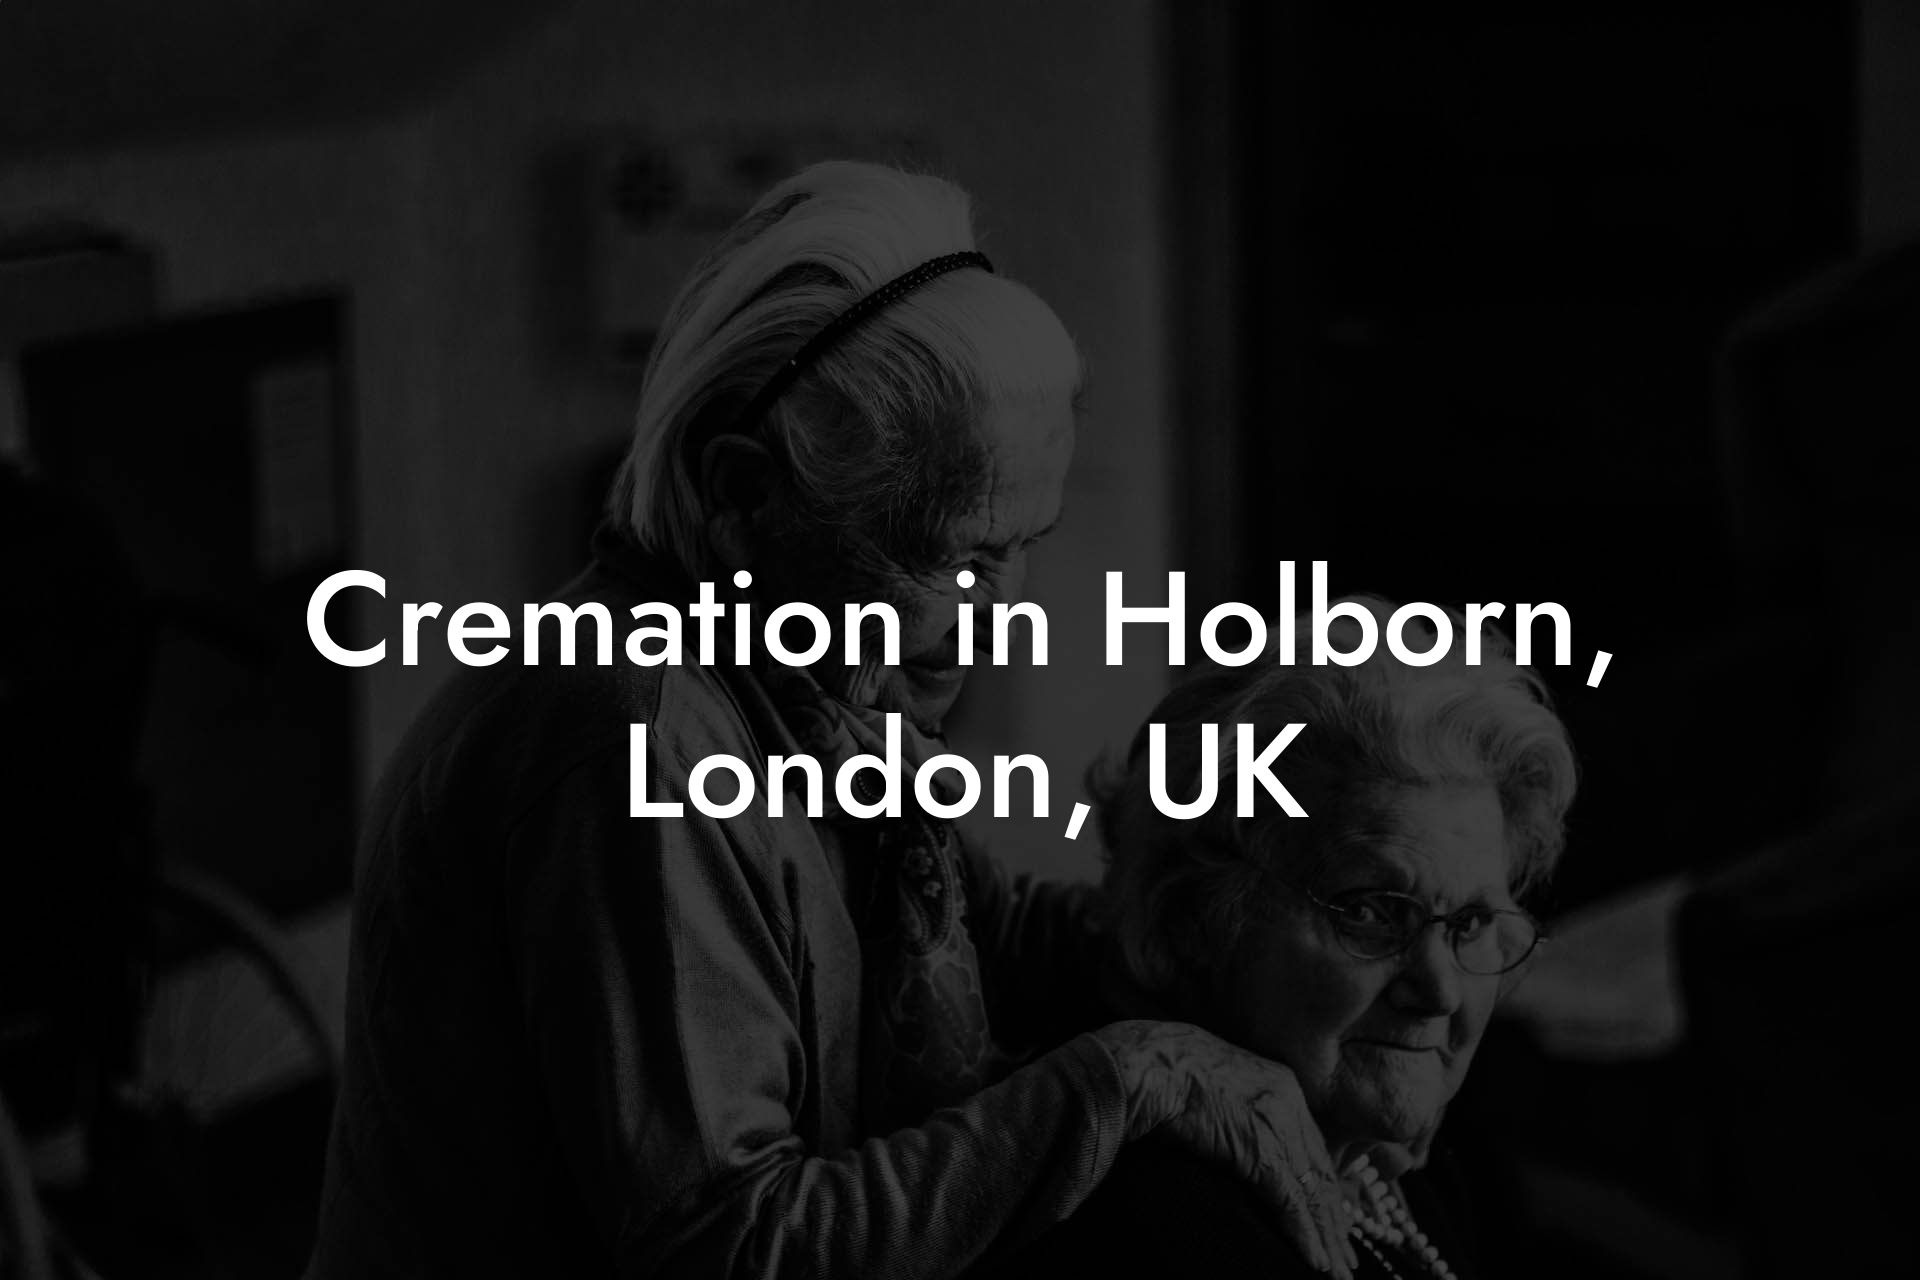 Cremation in Holborn, London, UK